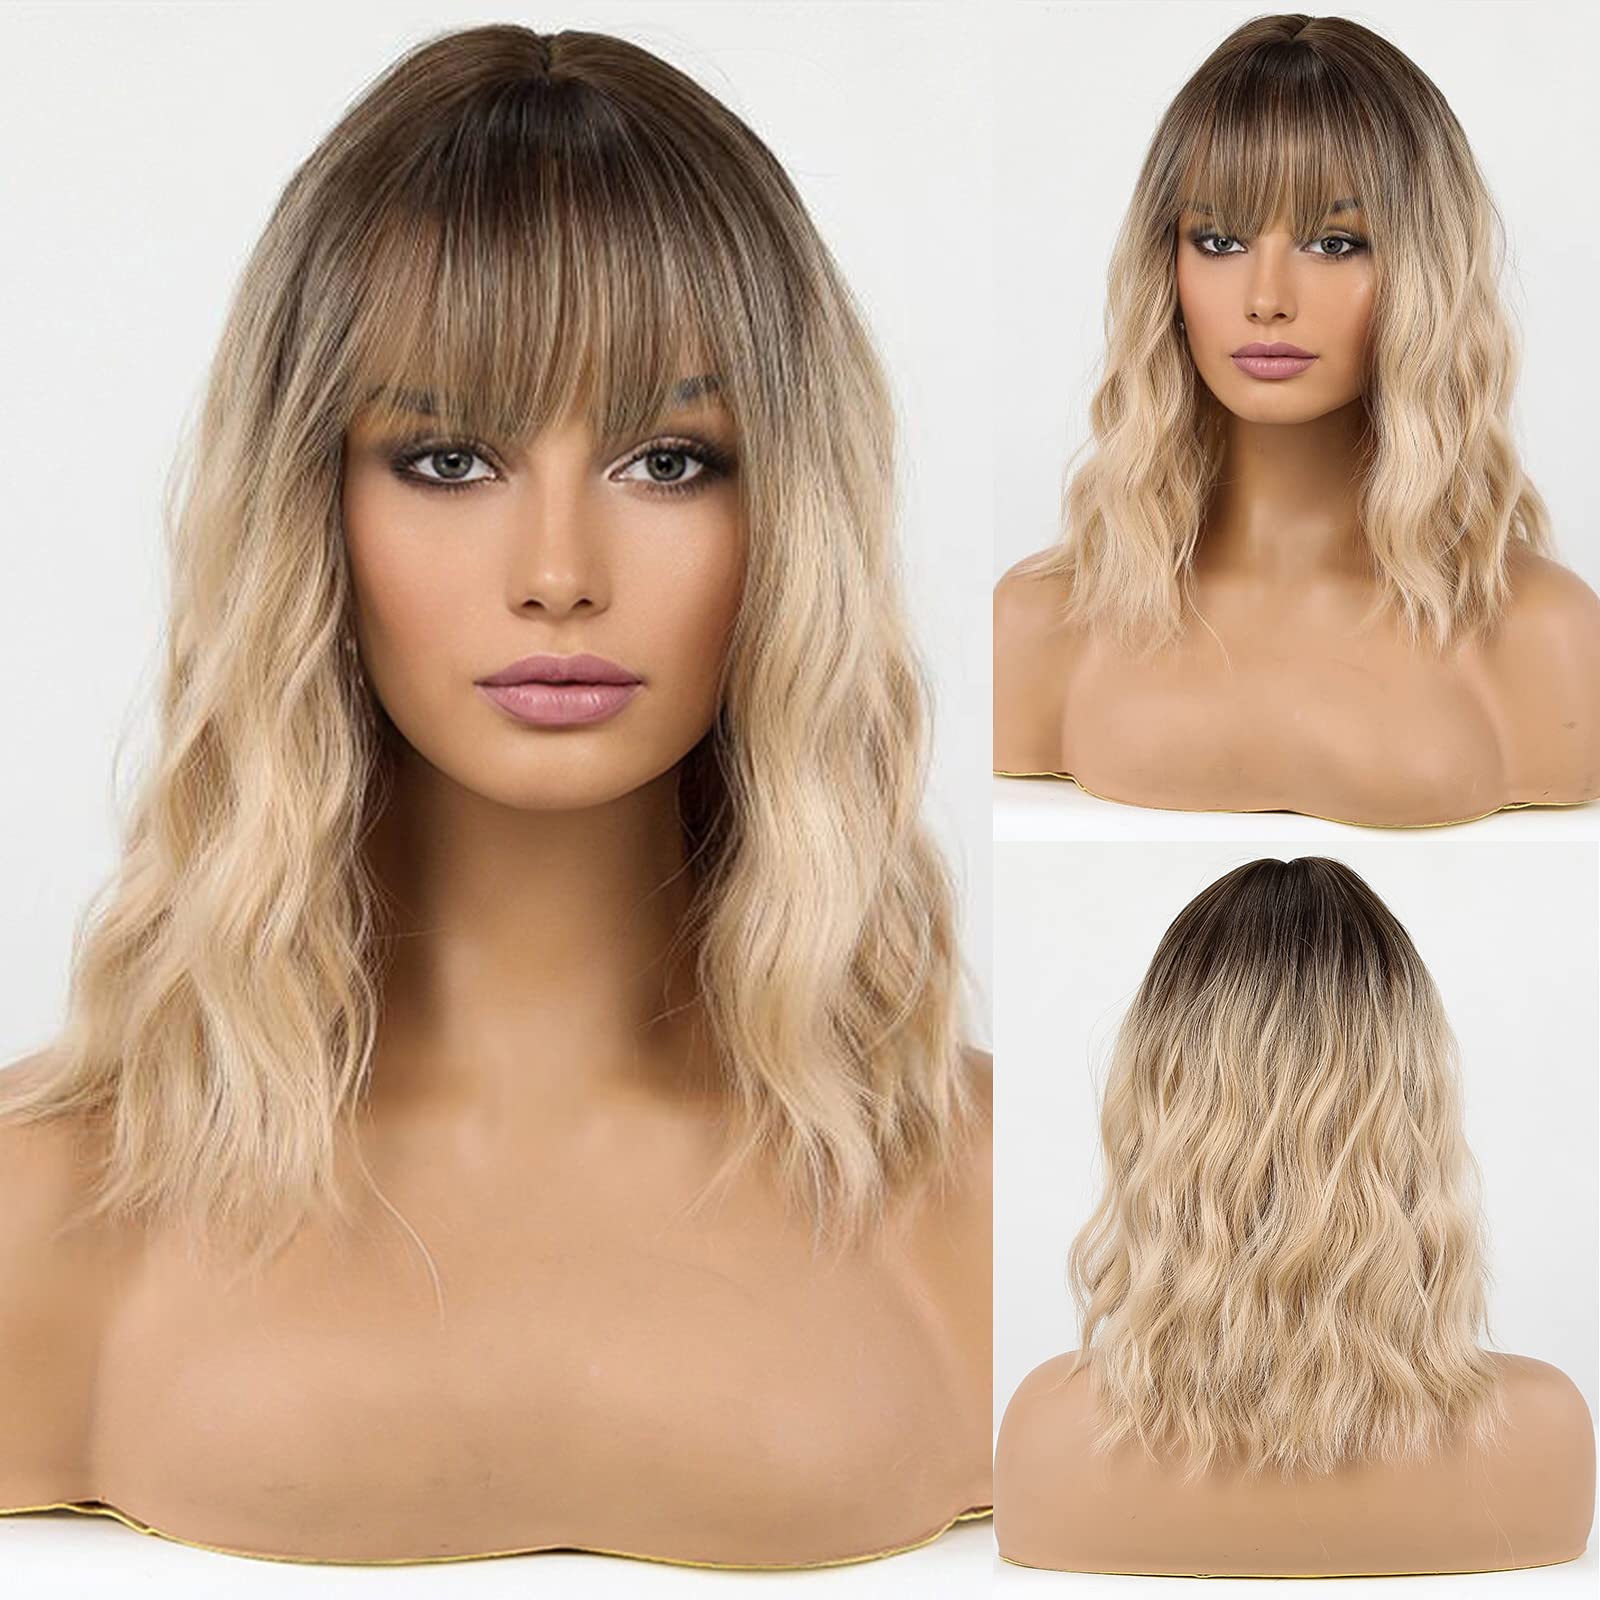 HAIRCUBE Blonde Wigs for Women, Shoulder Length Wig with Fringe, Synthetic Hair with Dark Roots